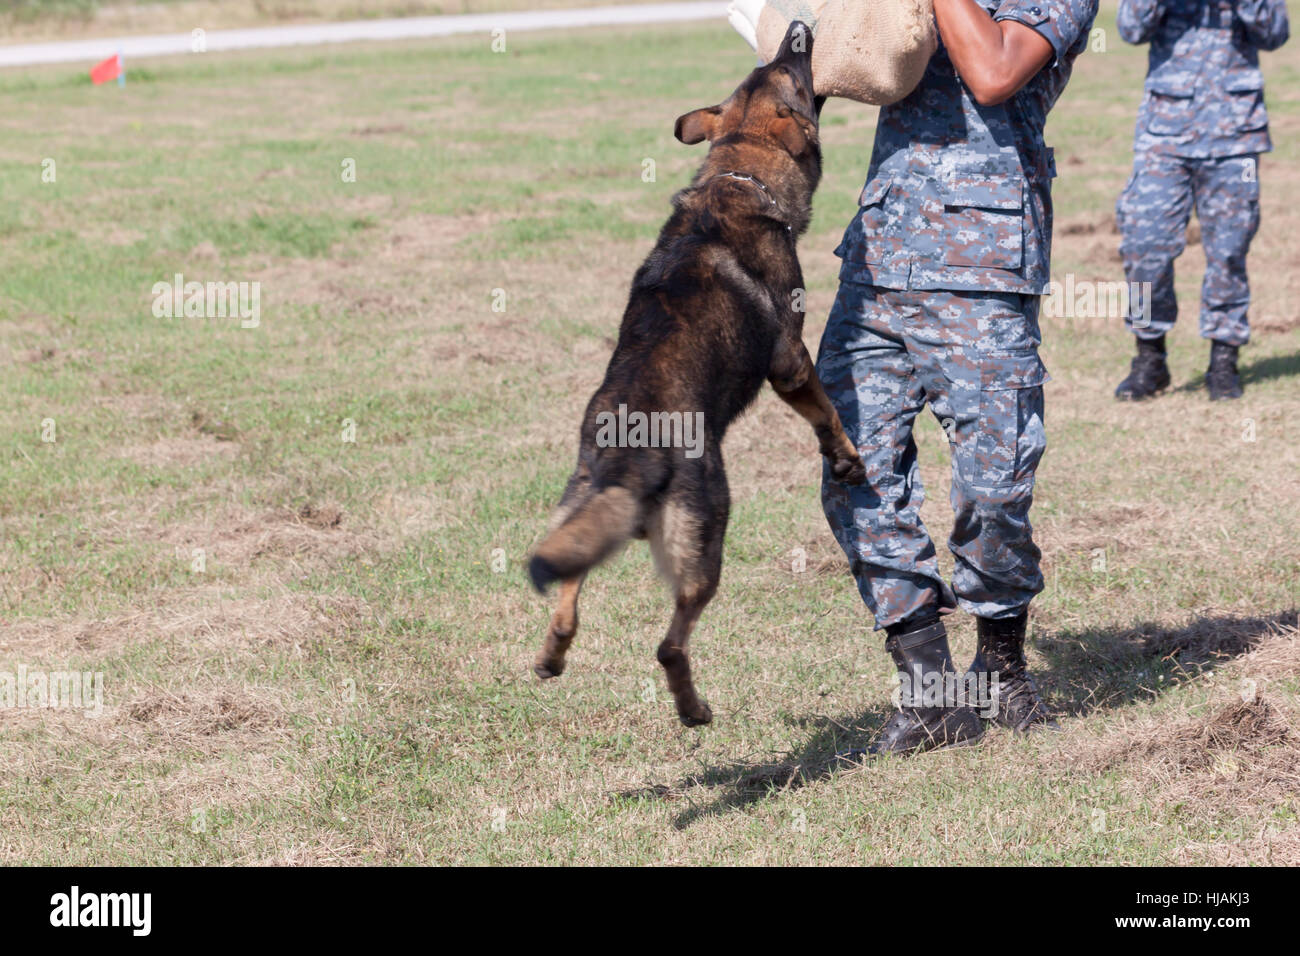 Soldiers from the K-9 dog unit works with his partner to apprehend a bad guy during a demonstration Stock Photo